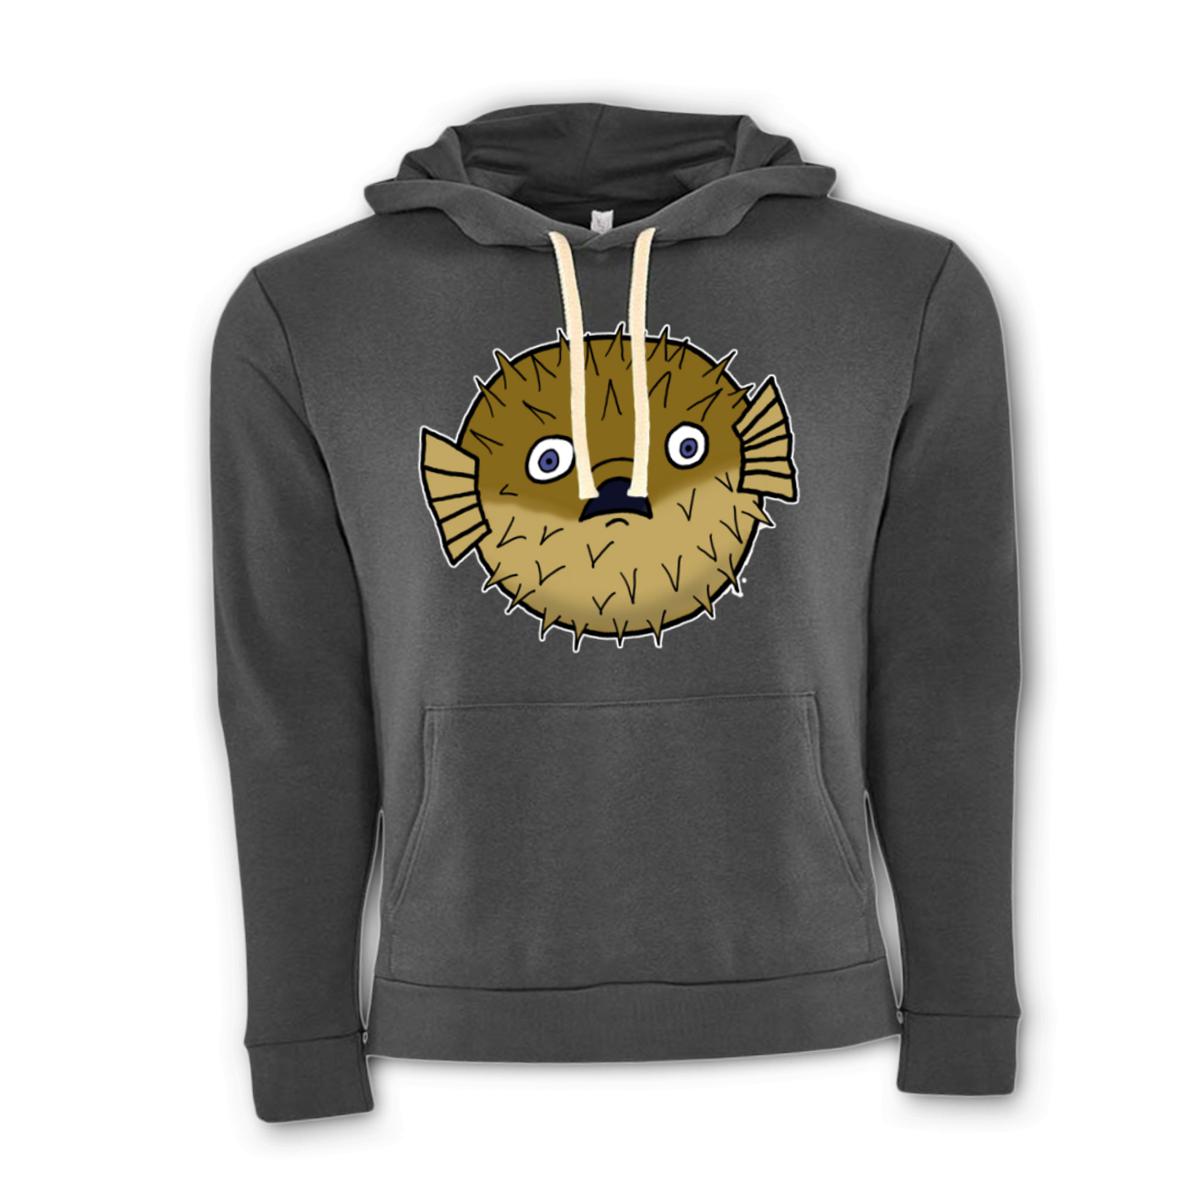 Puffer Fish Unisex Pullover Hoodie Small heavy-metal